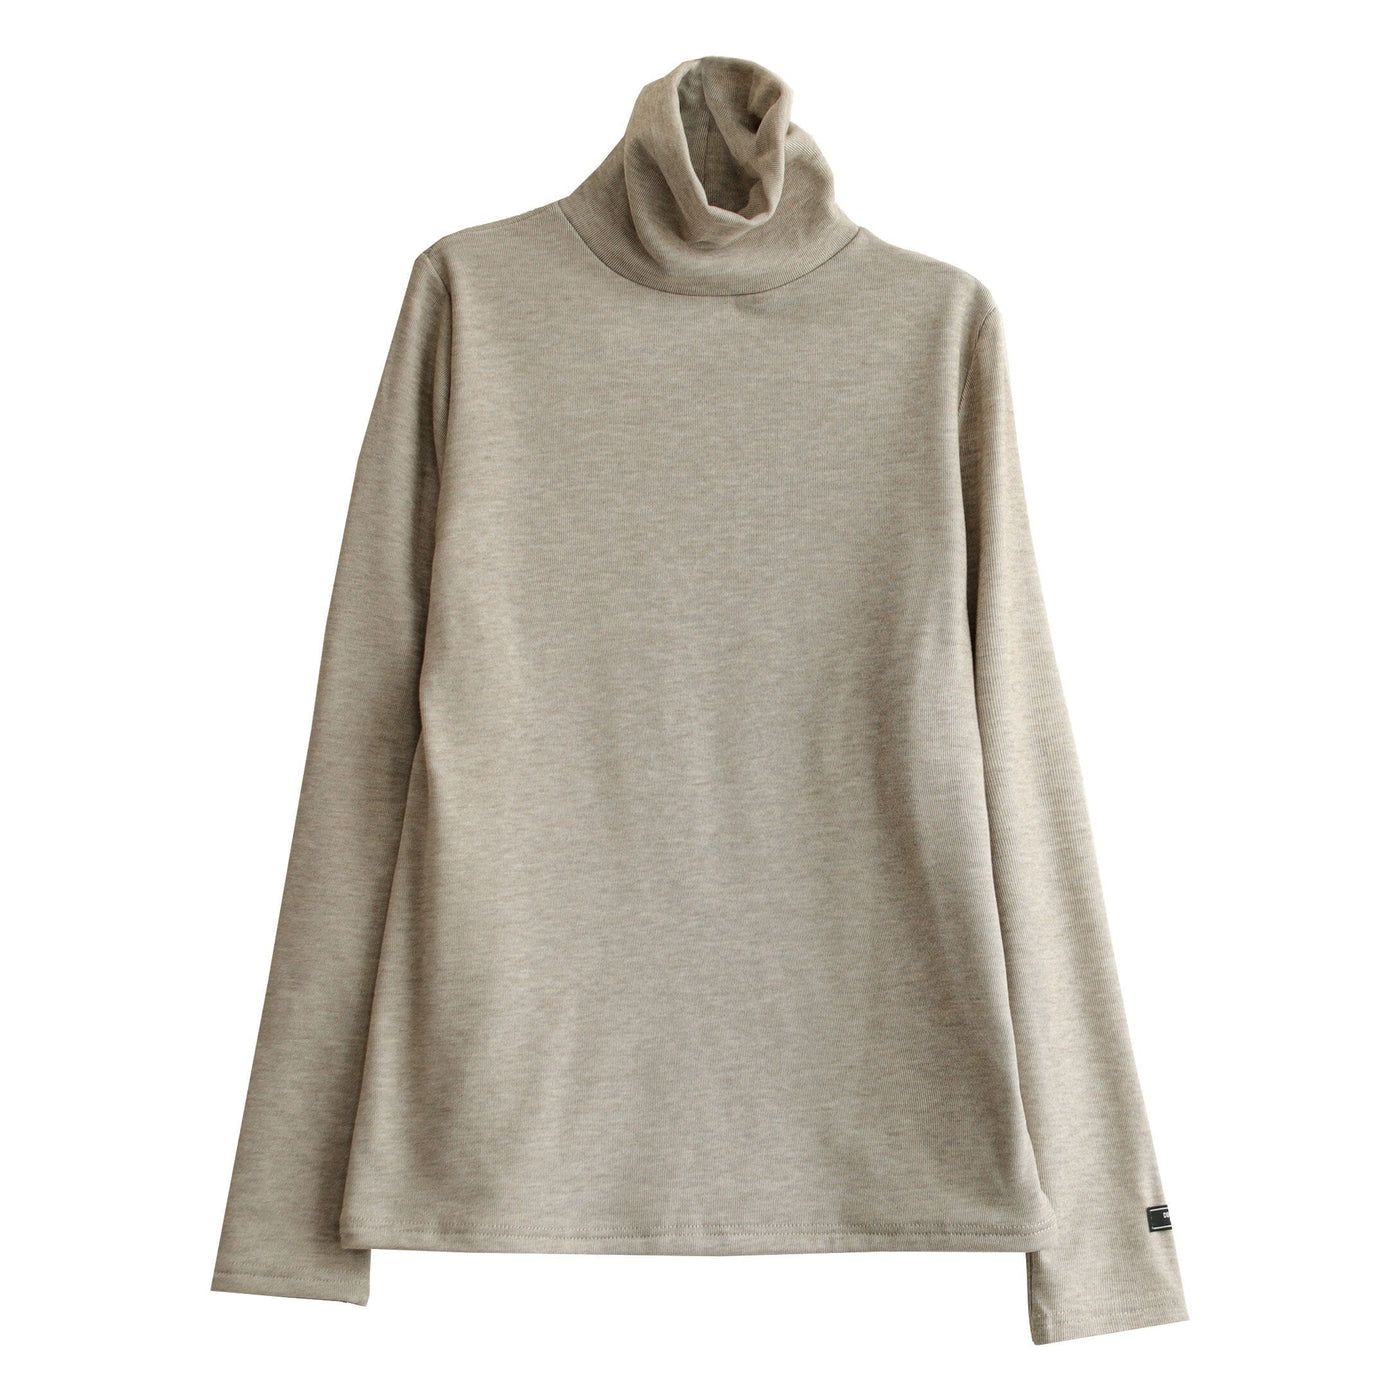 Women Solid Furred Casual Turtleneck Sweater